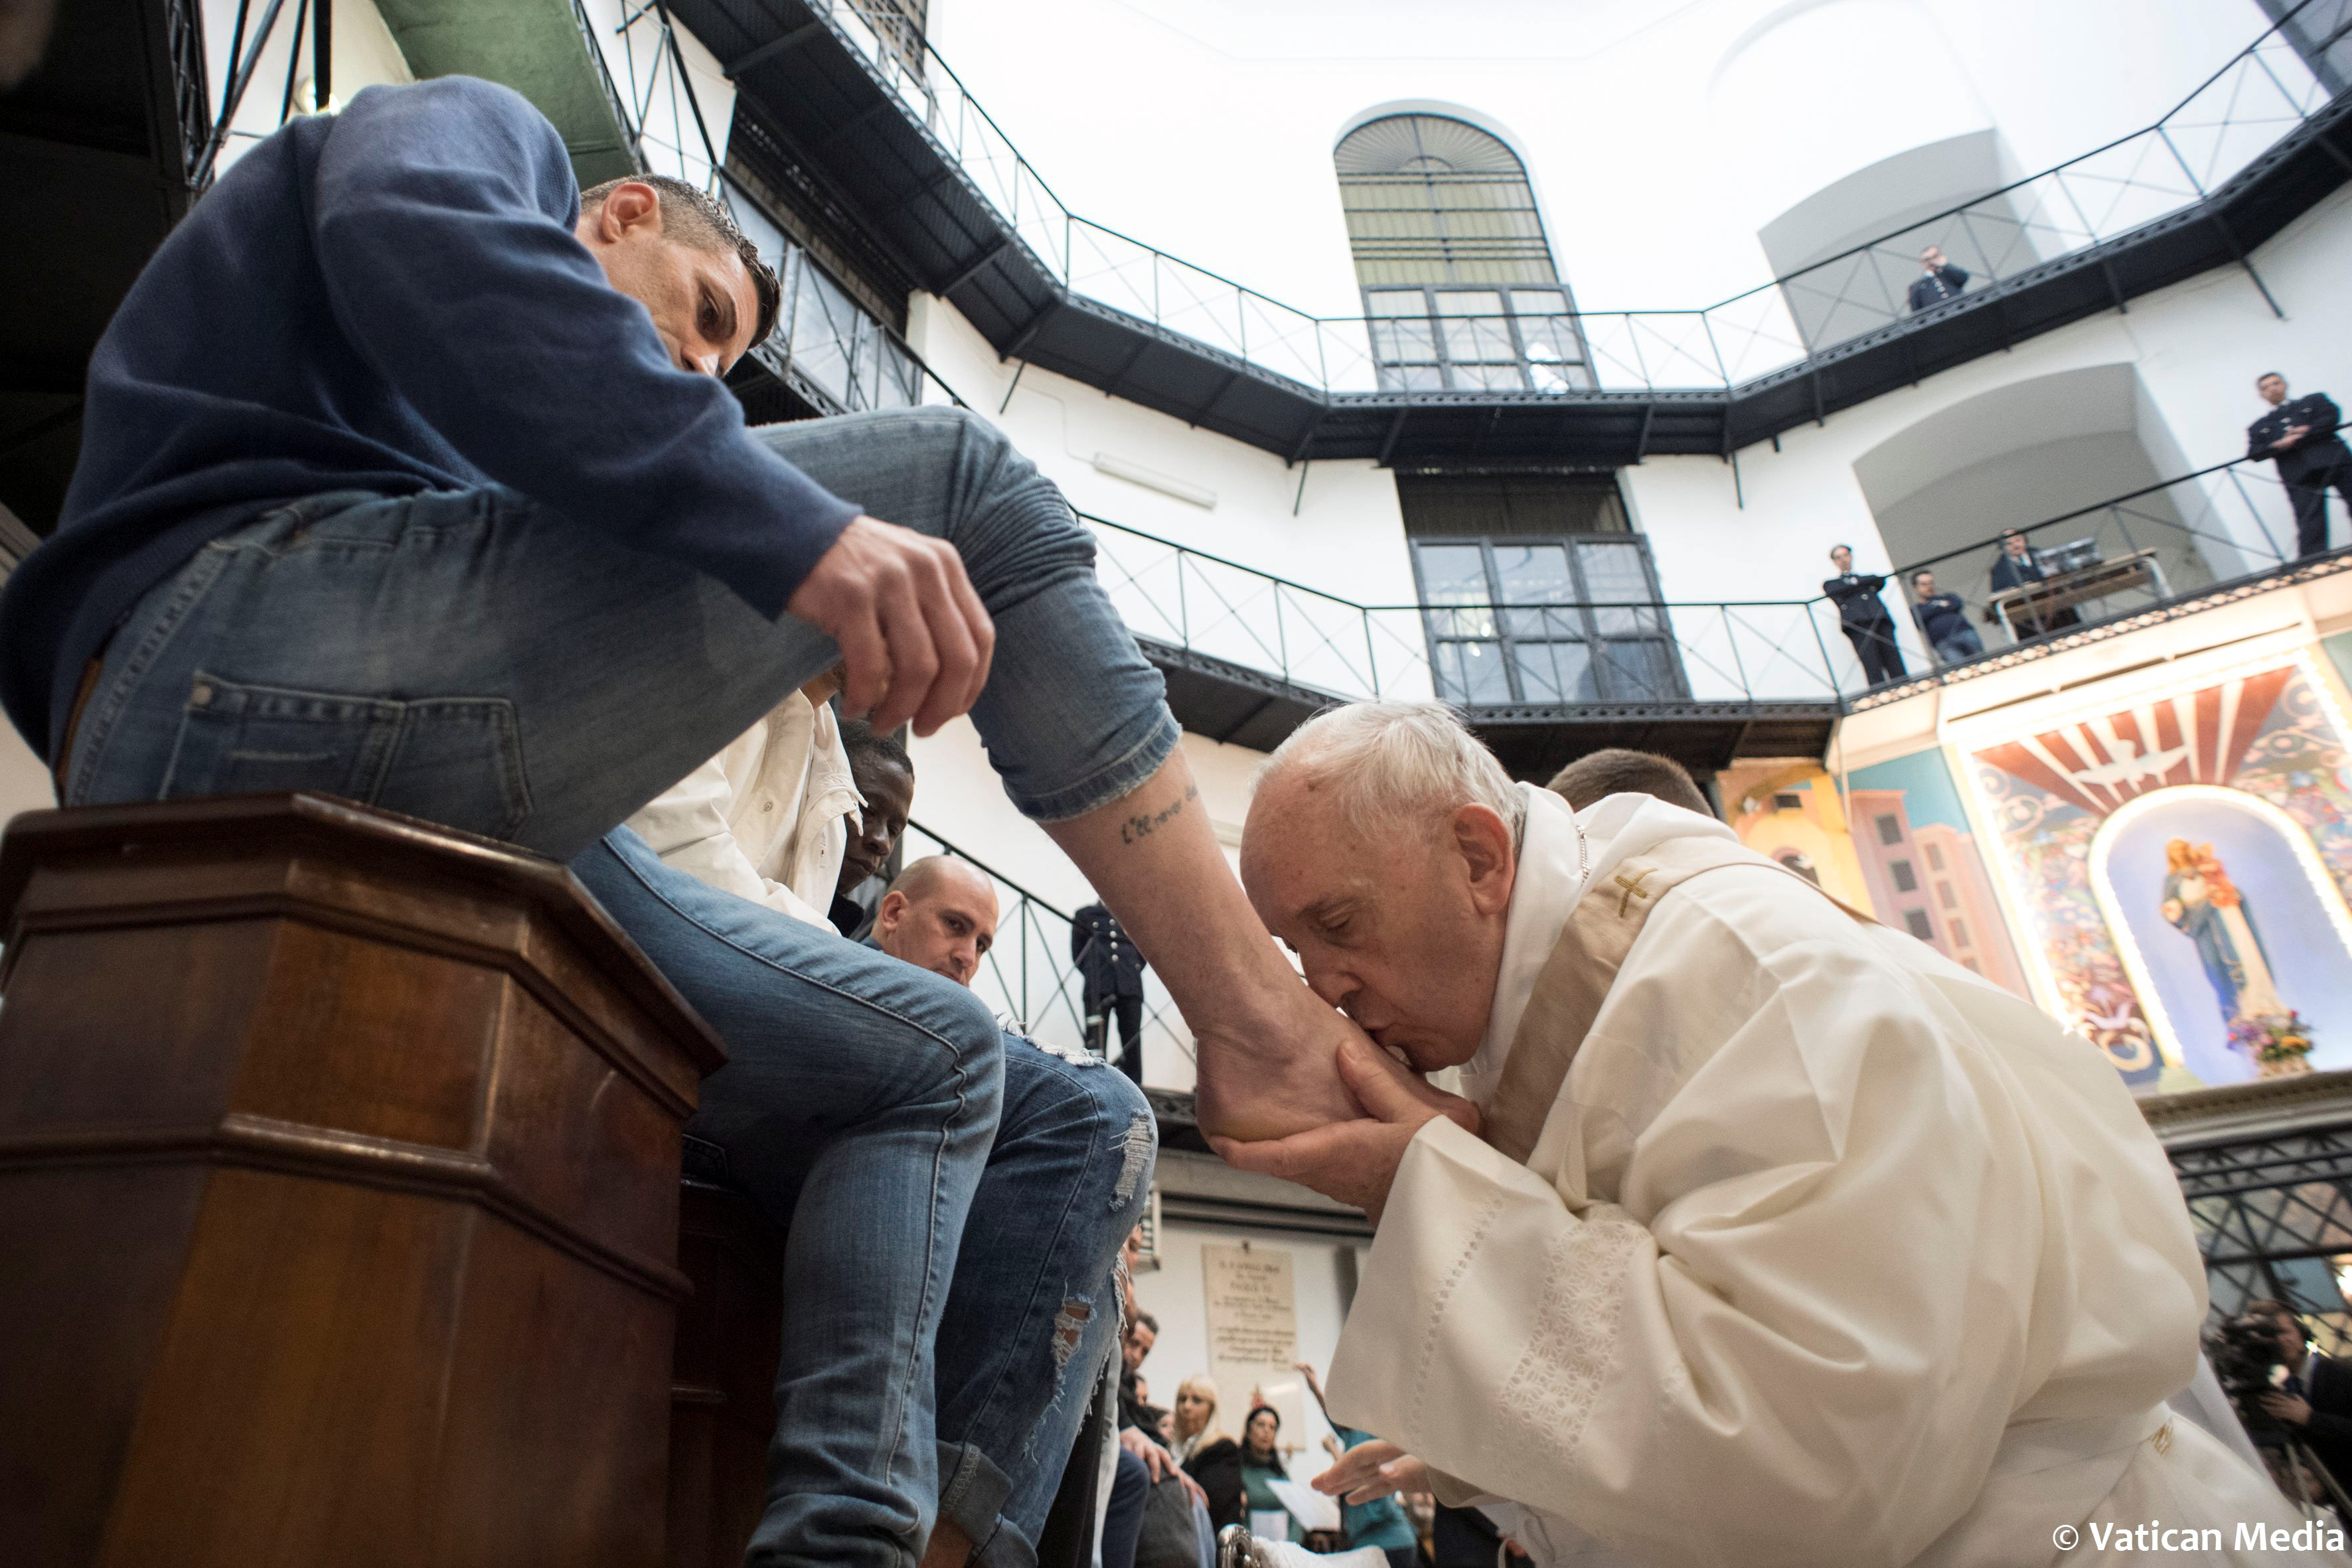 Pope to celebrate Holy Thursday with prisoners